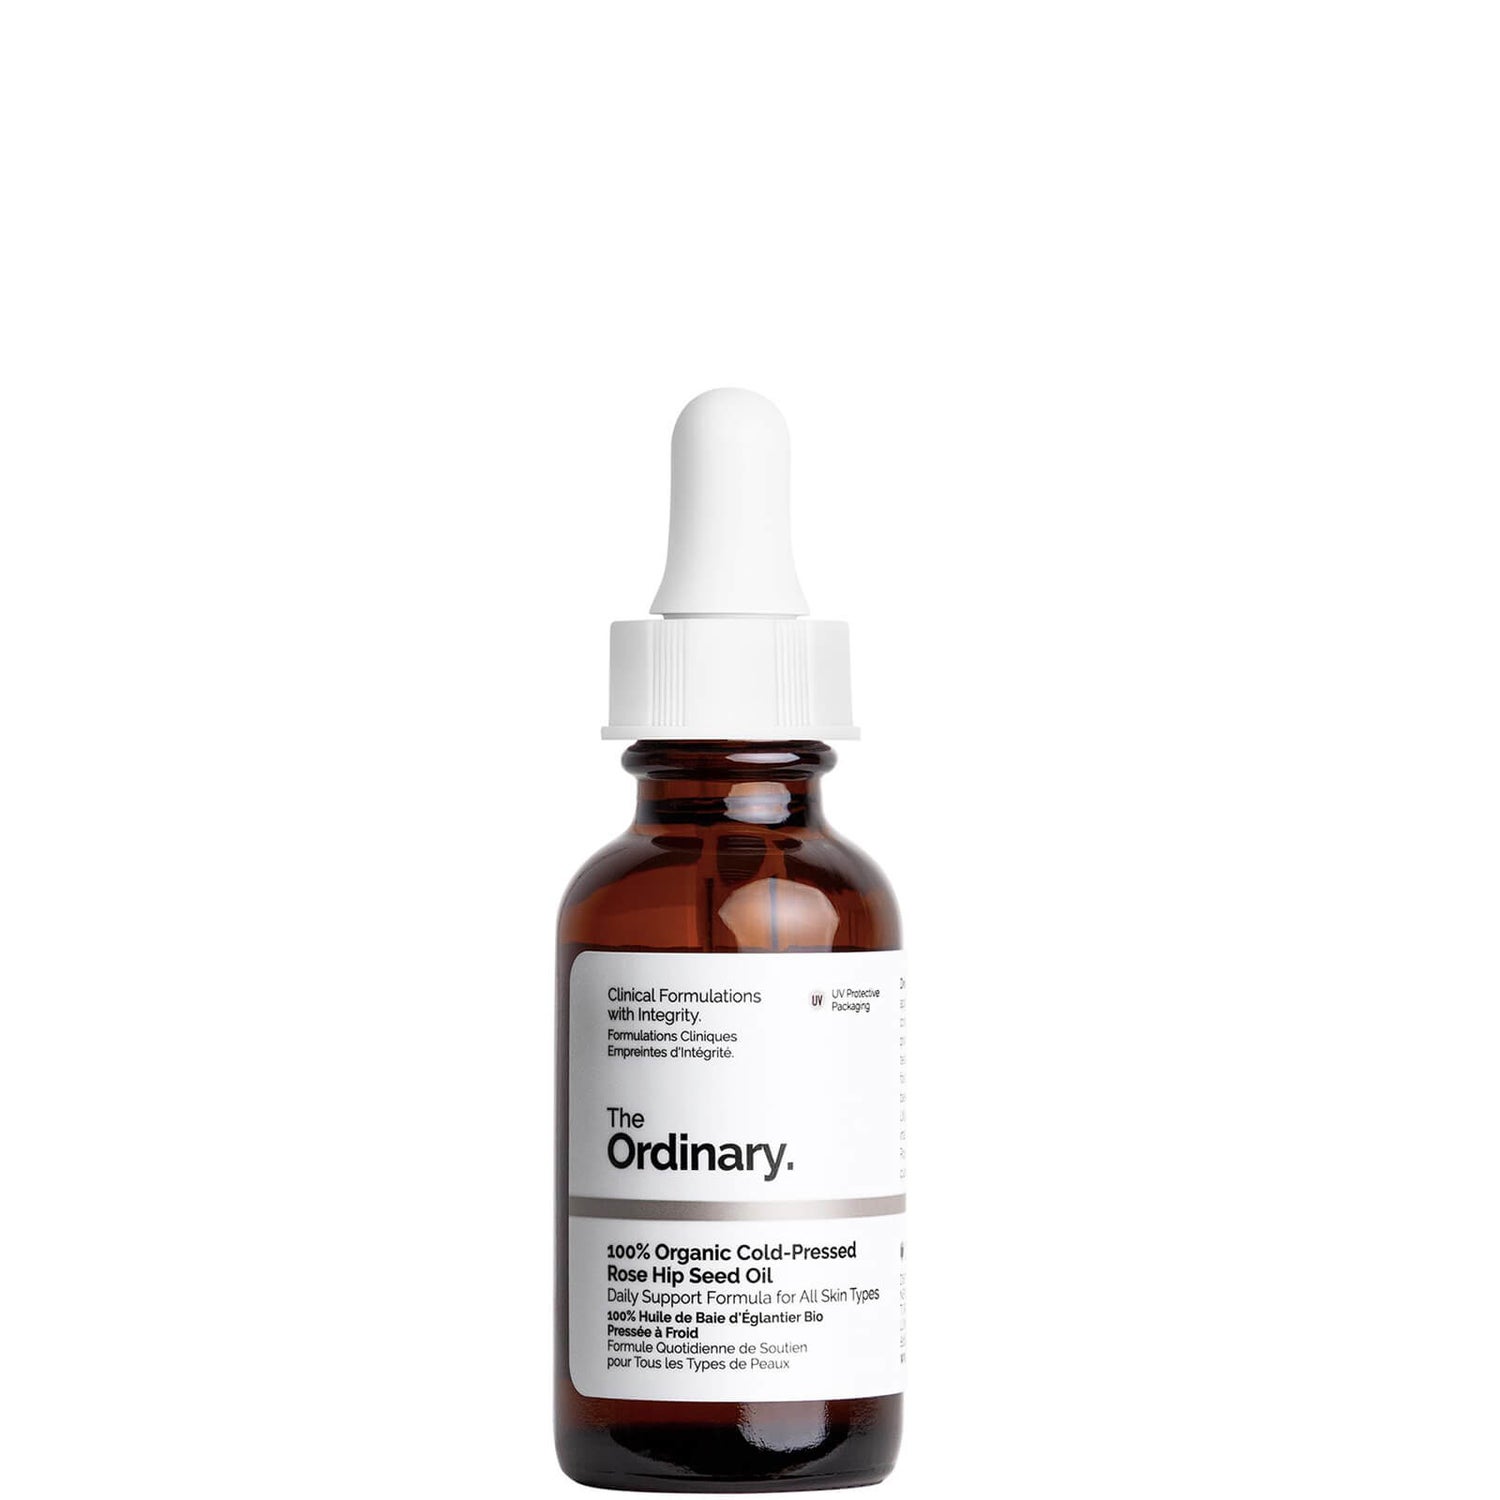 The Ordinary 100% Organic Cold-Pressed Rose Hip Seed Oil 30ml | Cult Beauty